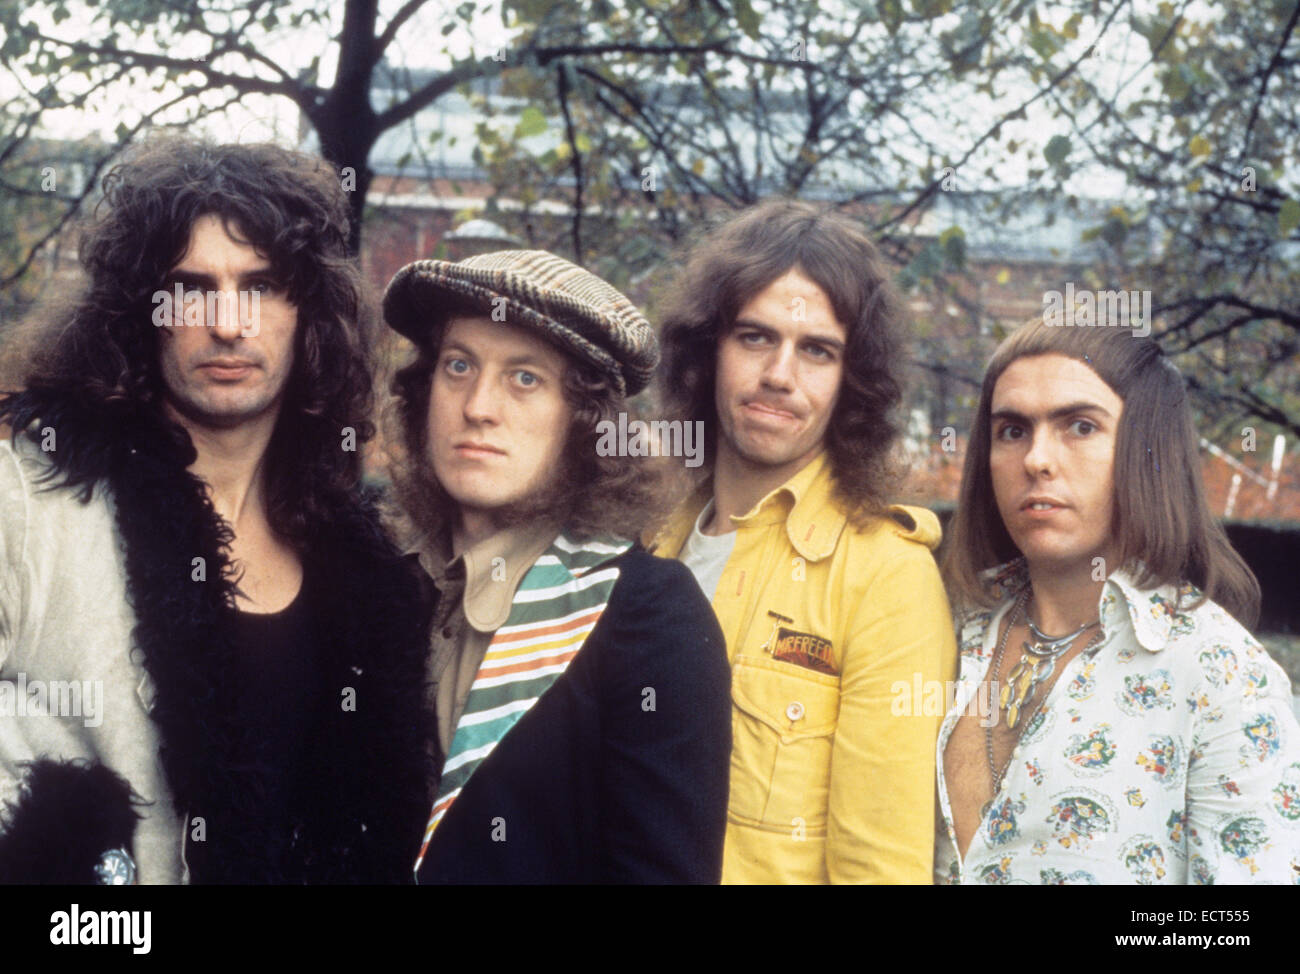 SLADE UK pop group about 1975 from left: Don Powell, Noddy Holder, Jim Lea, Dave Hill. Photo Tony Gale Stock Photo